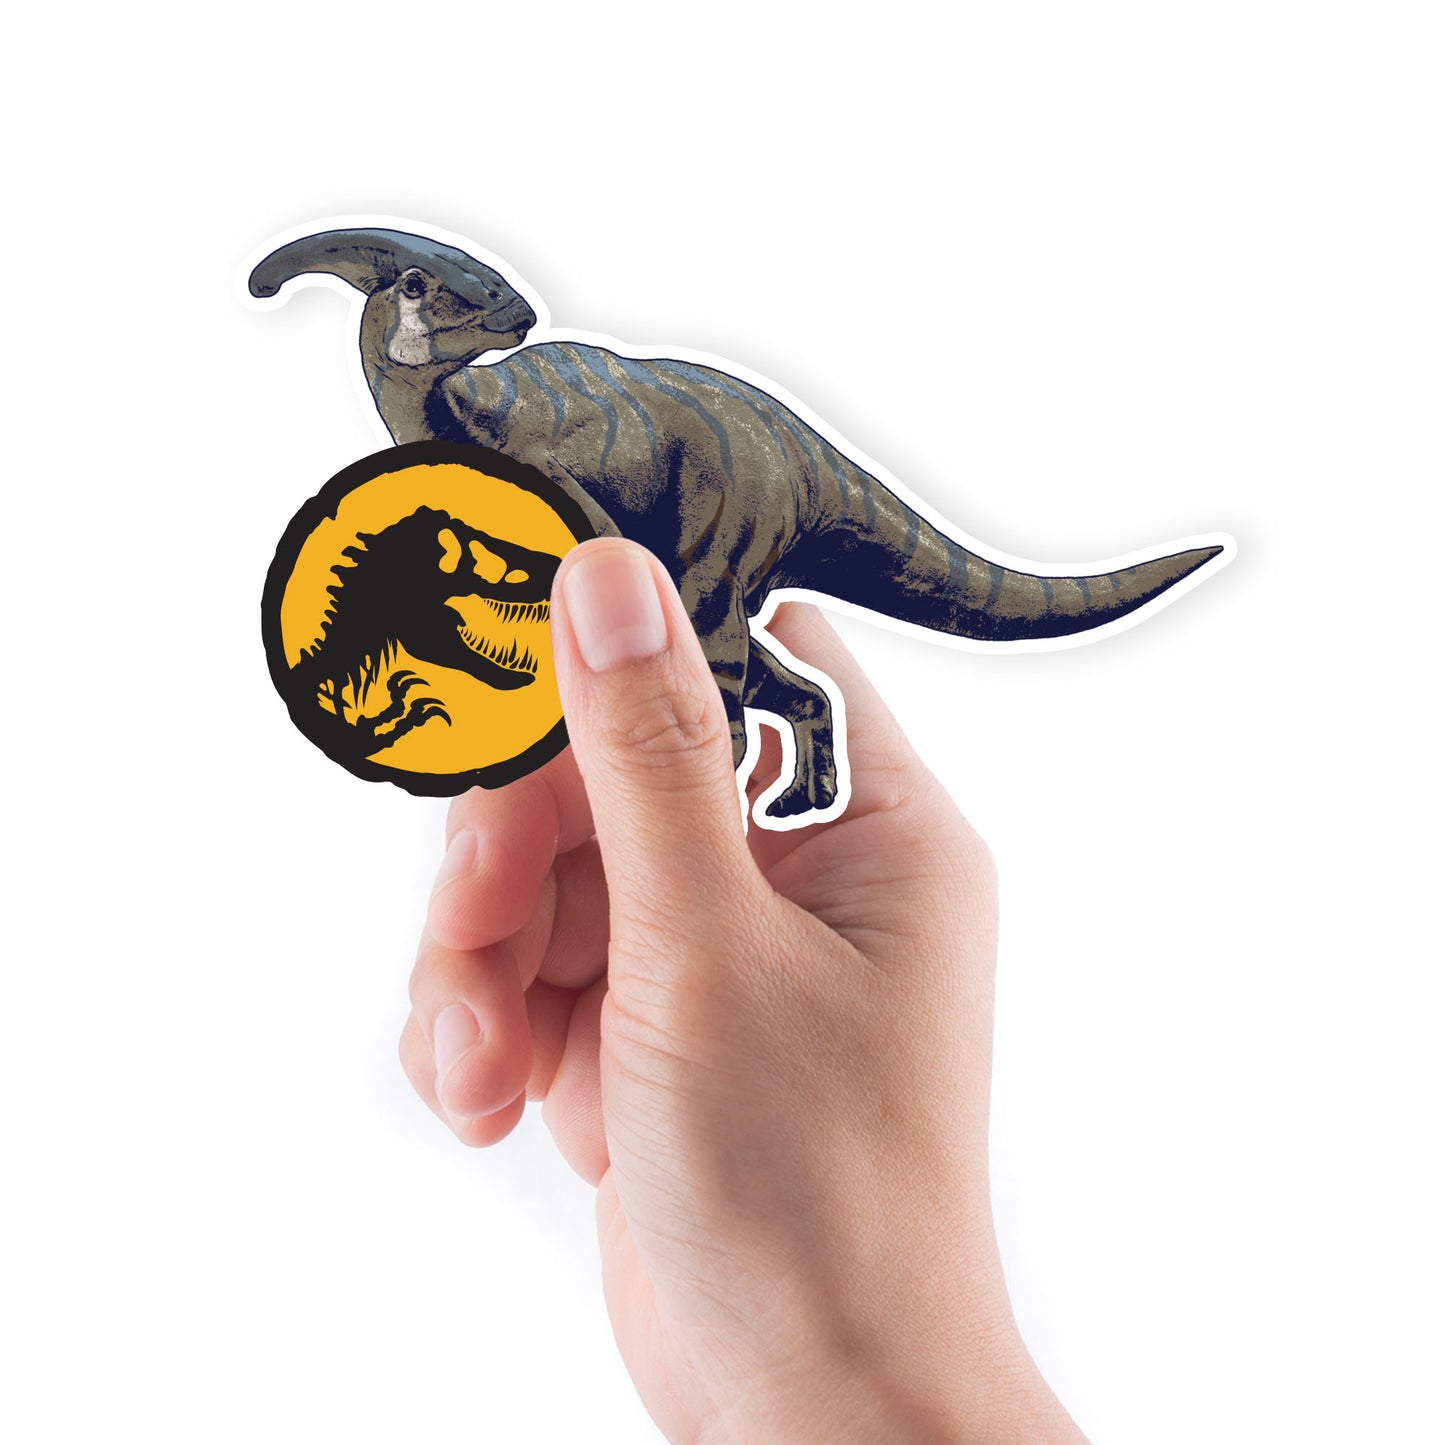 Sheet of 5 -Jurassic World Dominion: Parasaurolophus Minis - Officially Licensed NBC Universal Removable Adhesive Decal